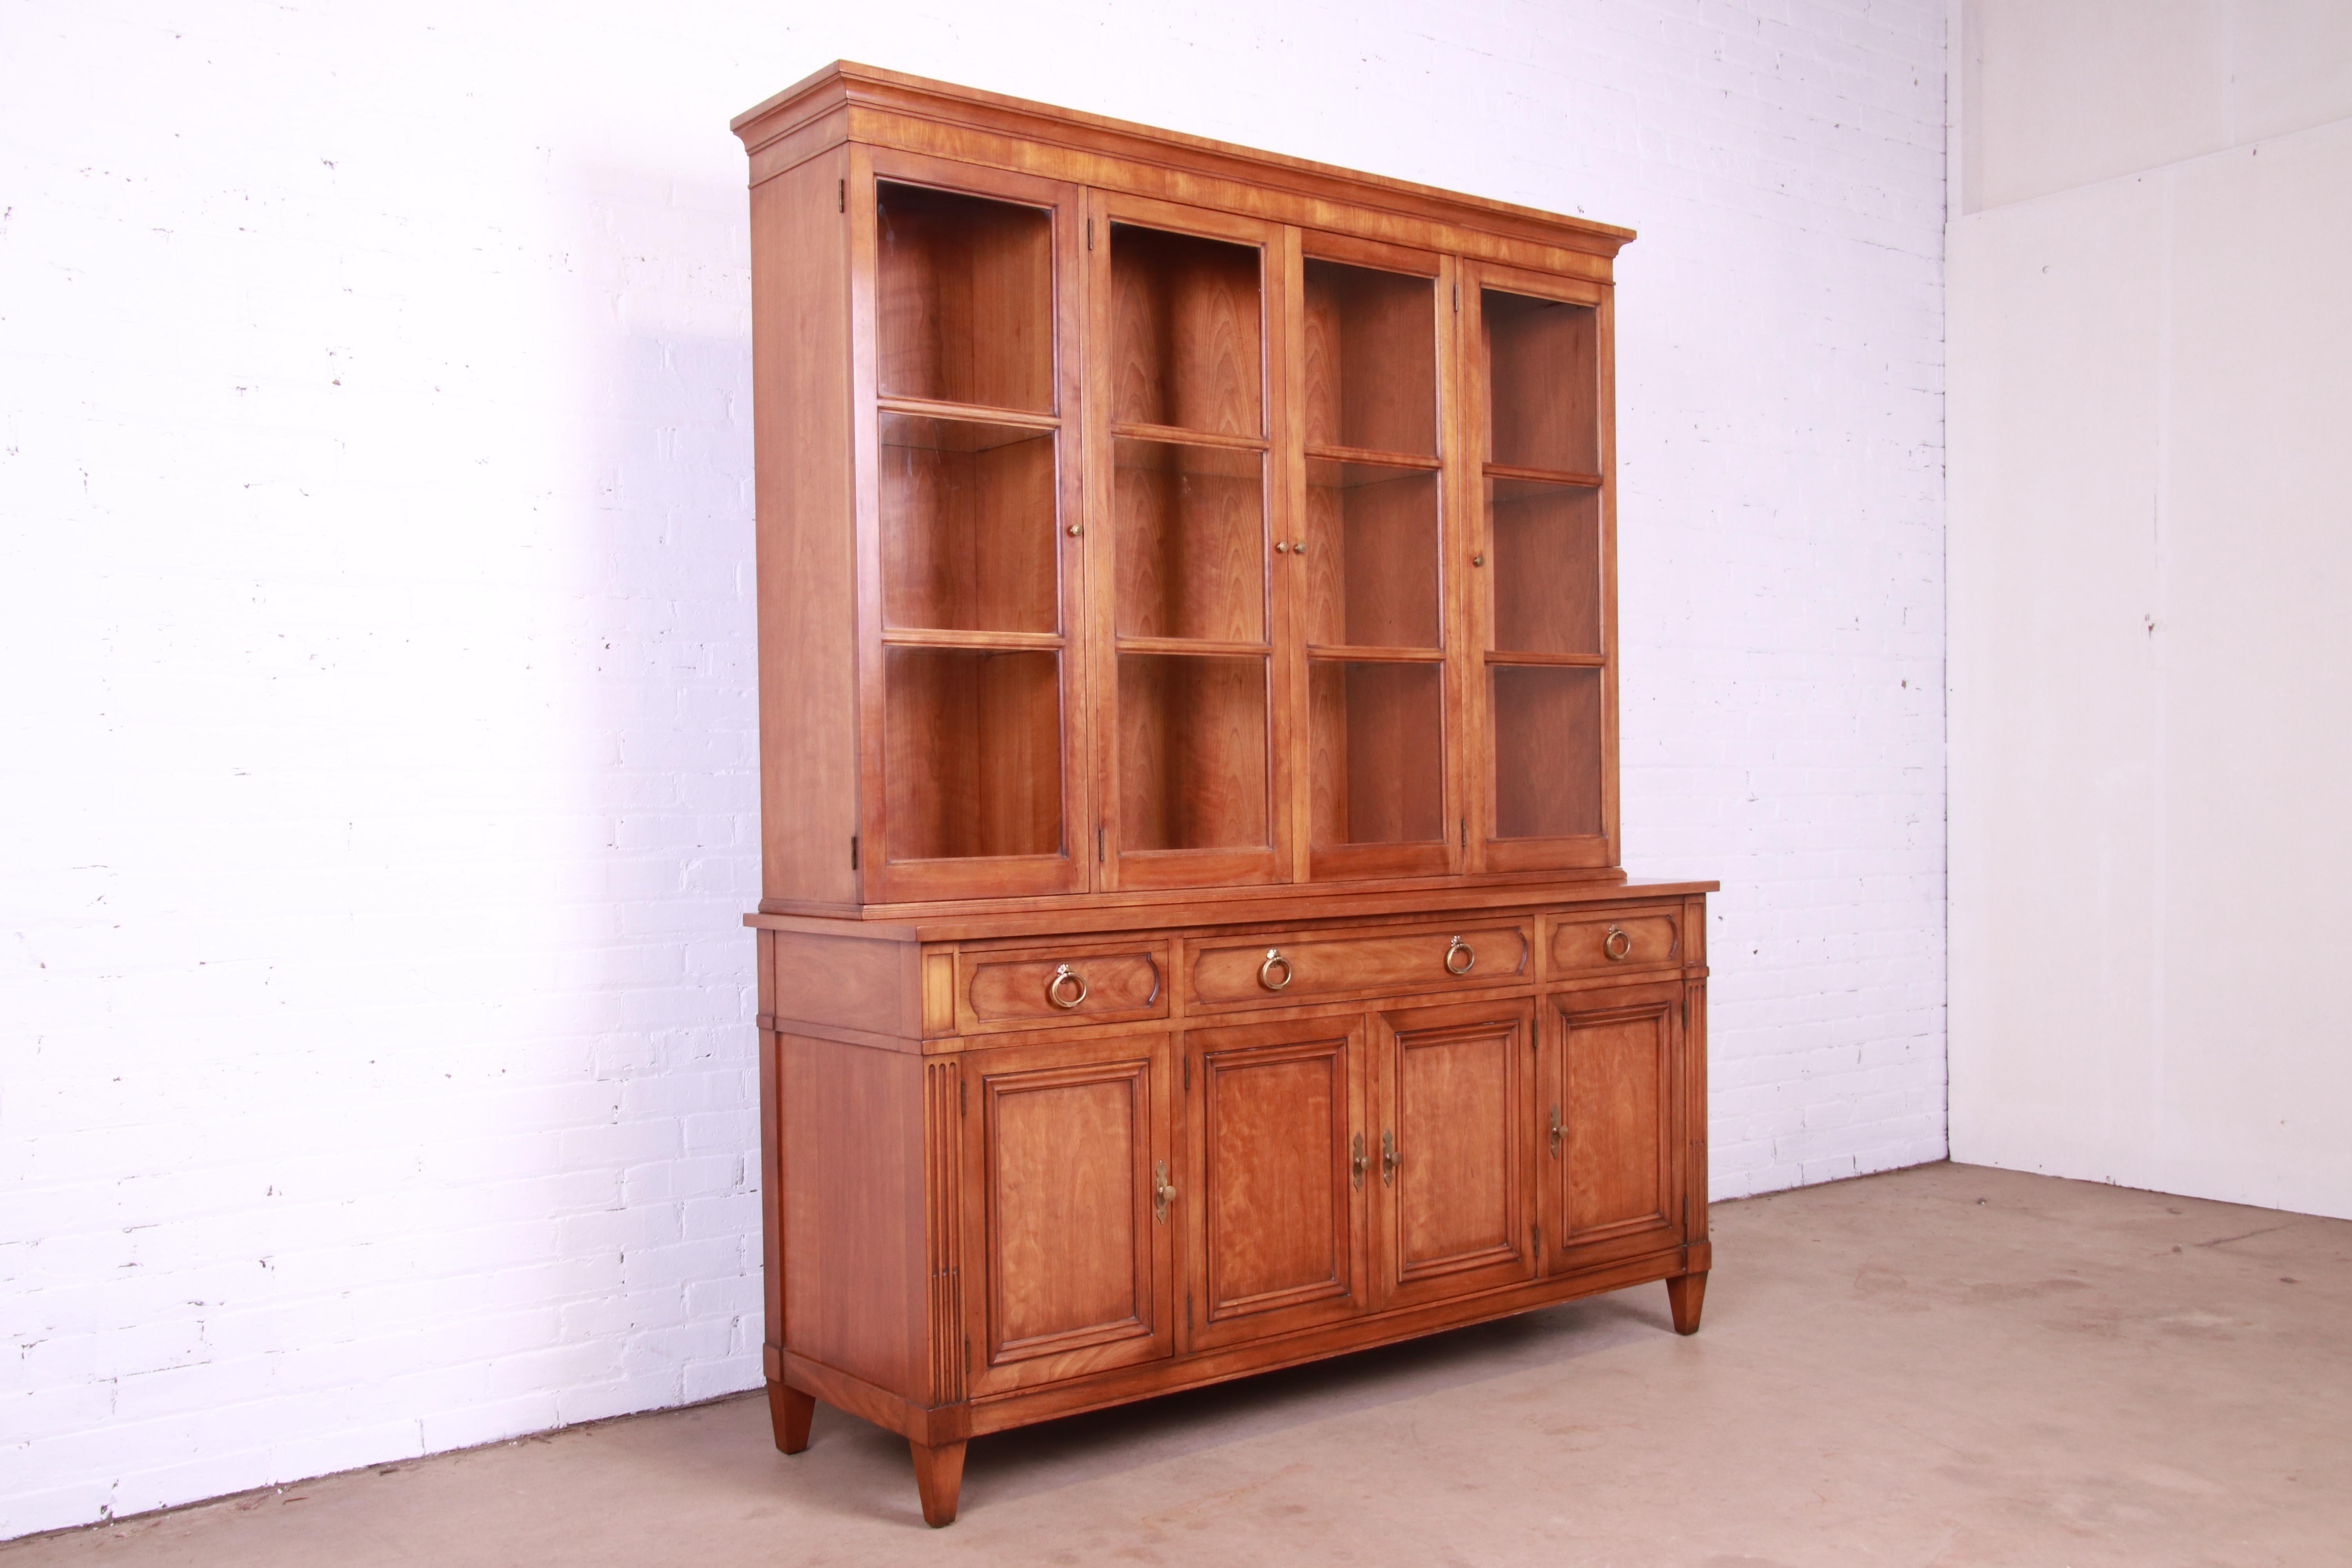 20th Century Kindel Furniture Mid-Century French Regency Cherry Breakfront Bookcase Cabinet For Sale